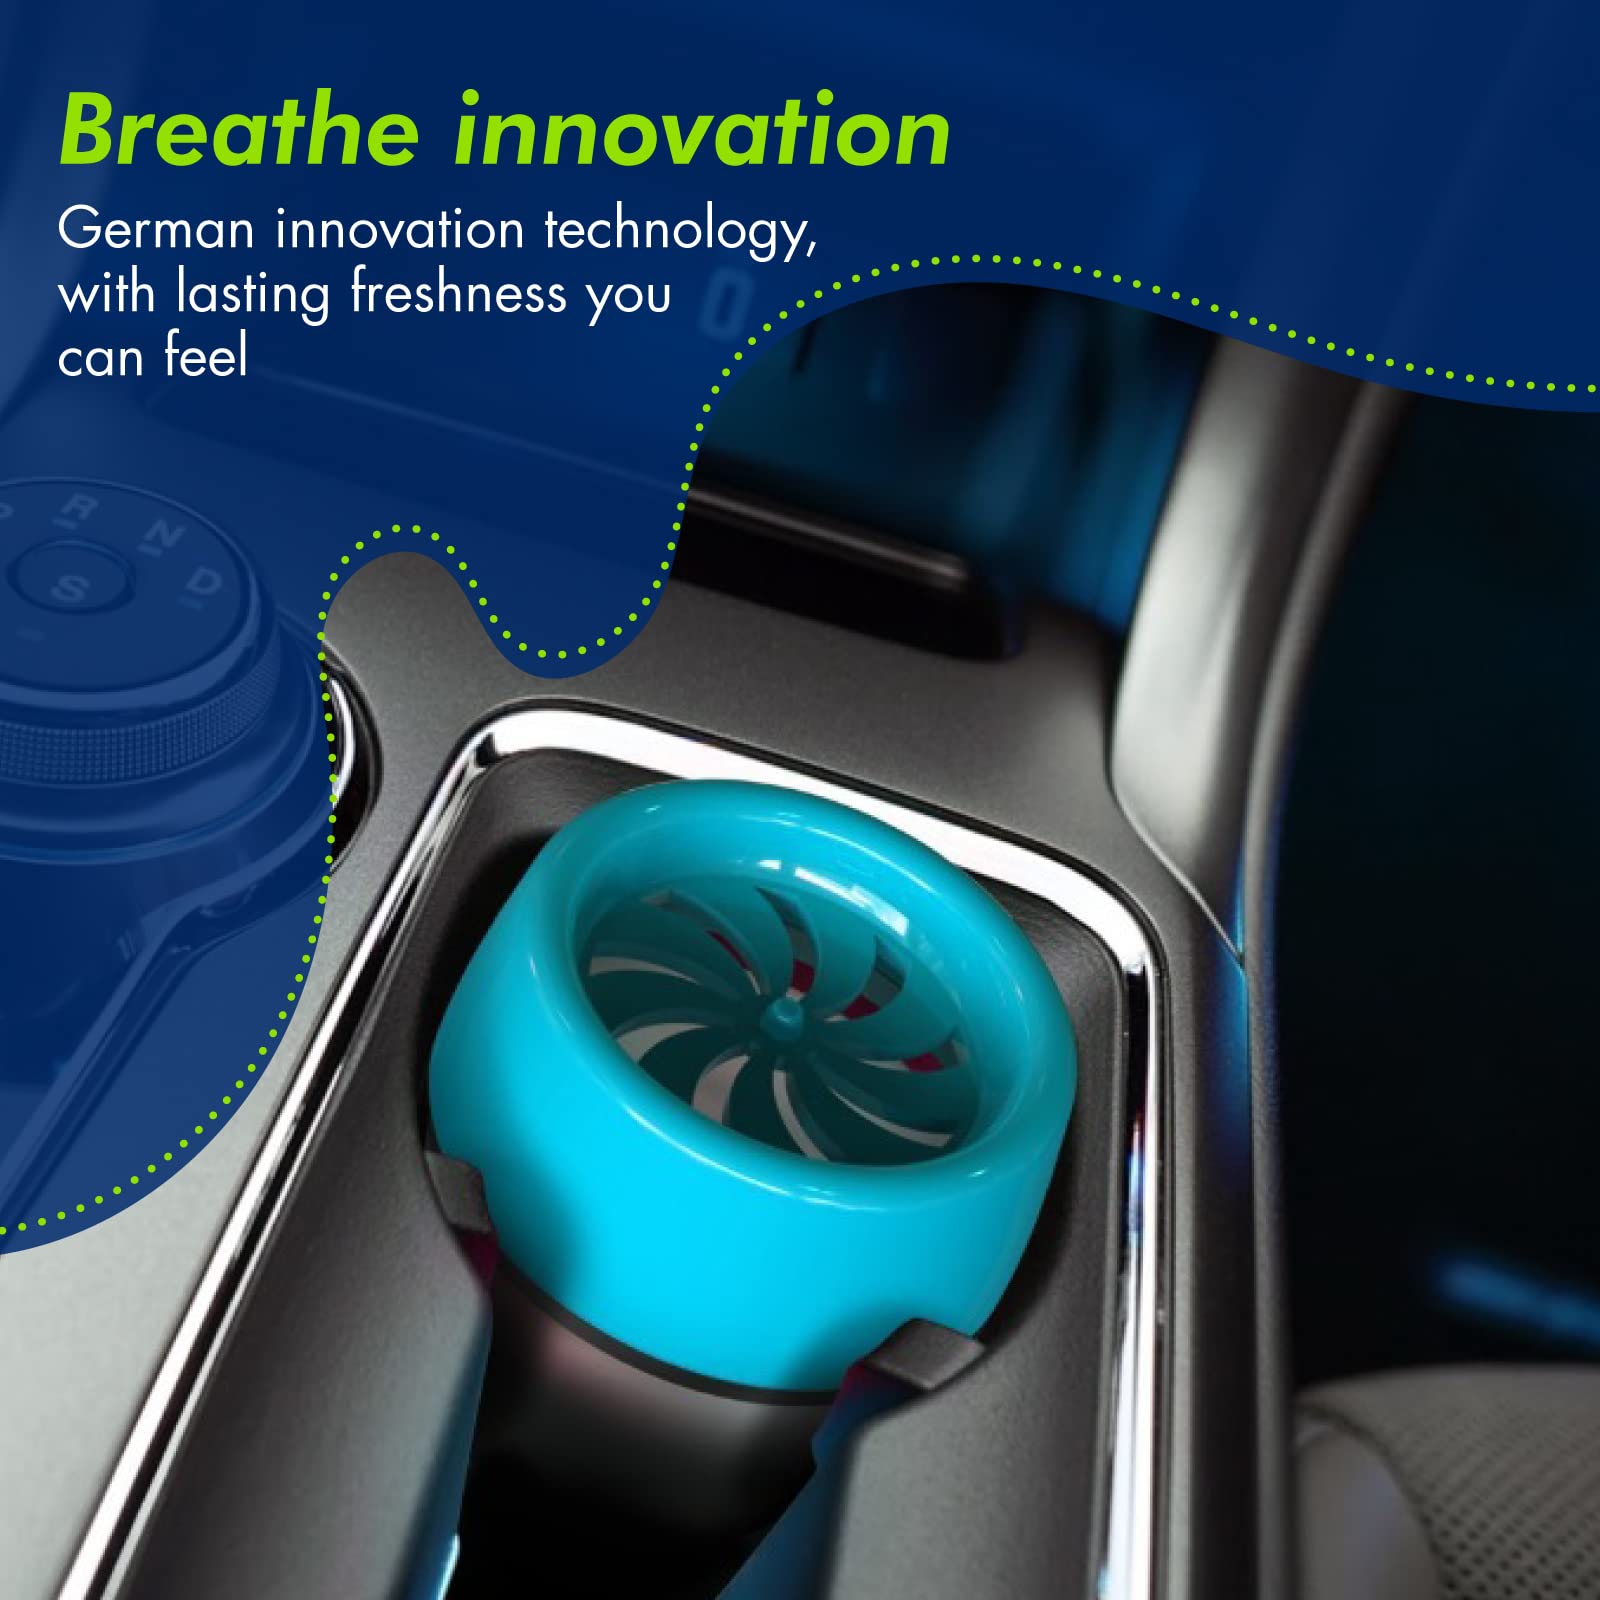 Absorbia Aviator Gel Air Freshener - Pack of 2 (125g X 2 ) with